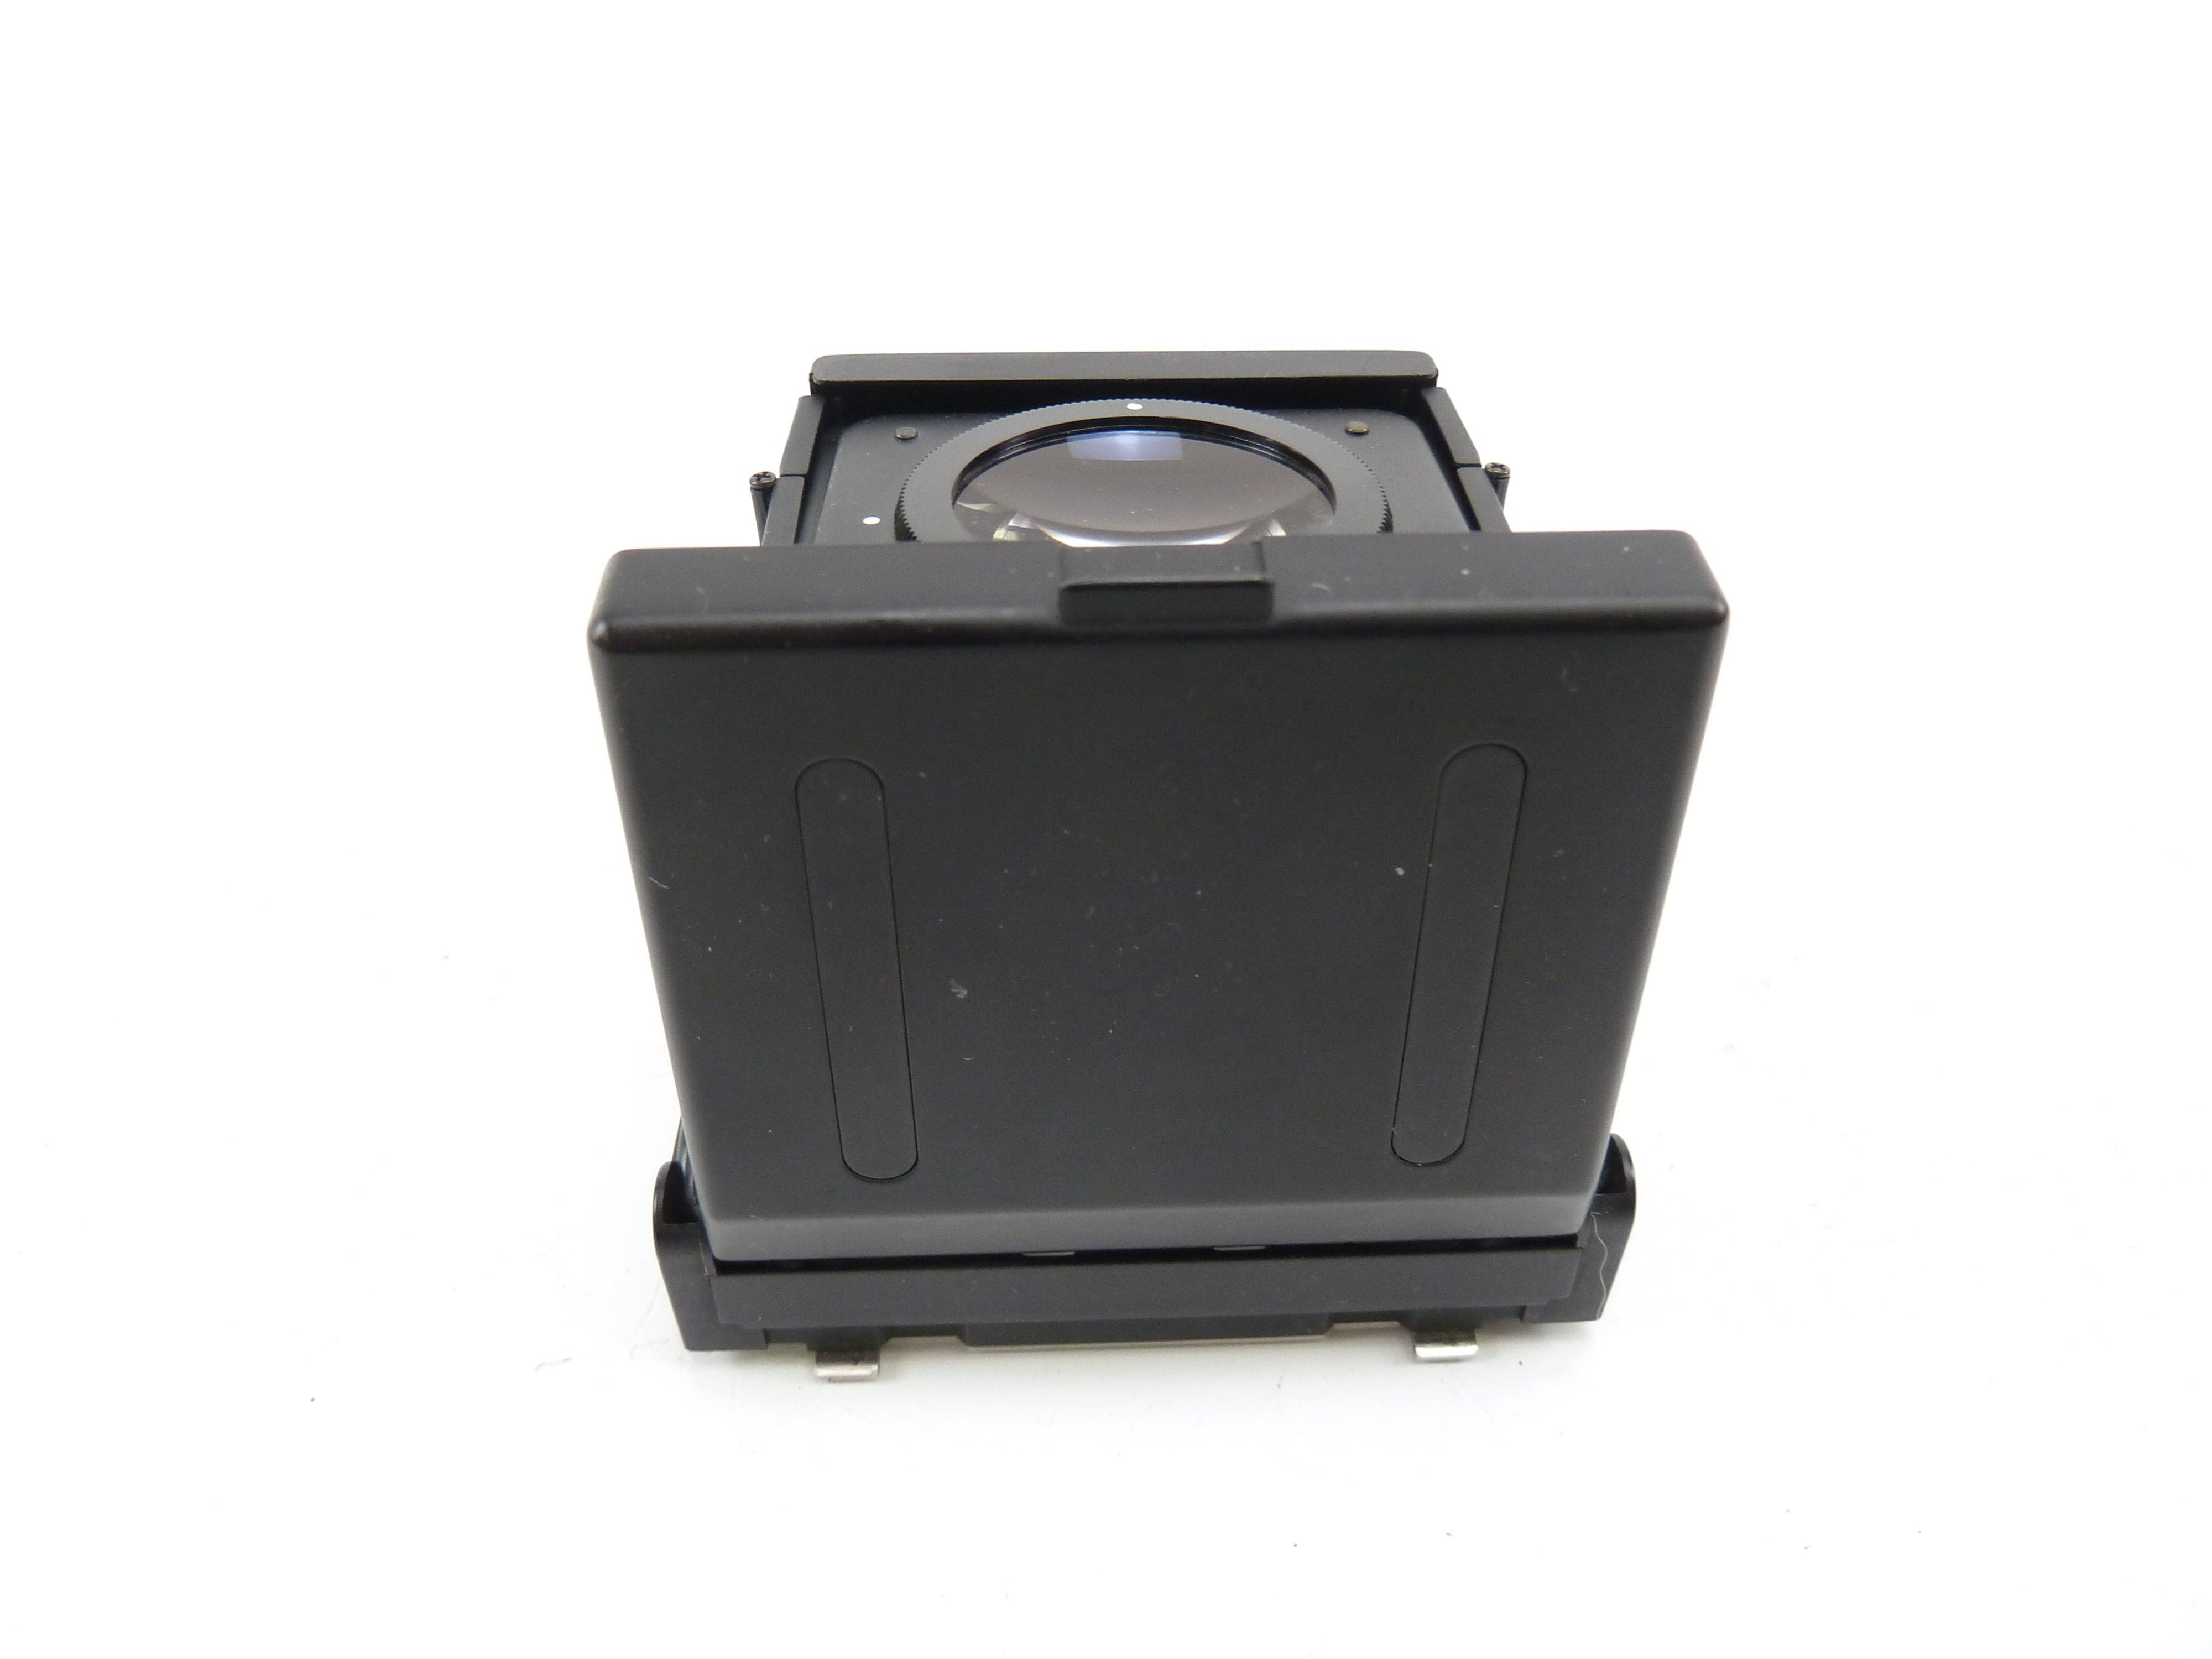 Mamiya 645 Pro Waist Level Finder for 645 Pro, Pro TL, and 645